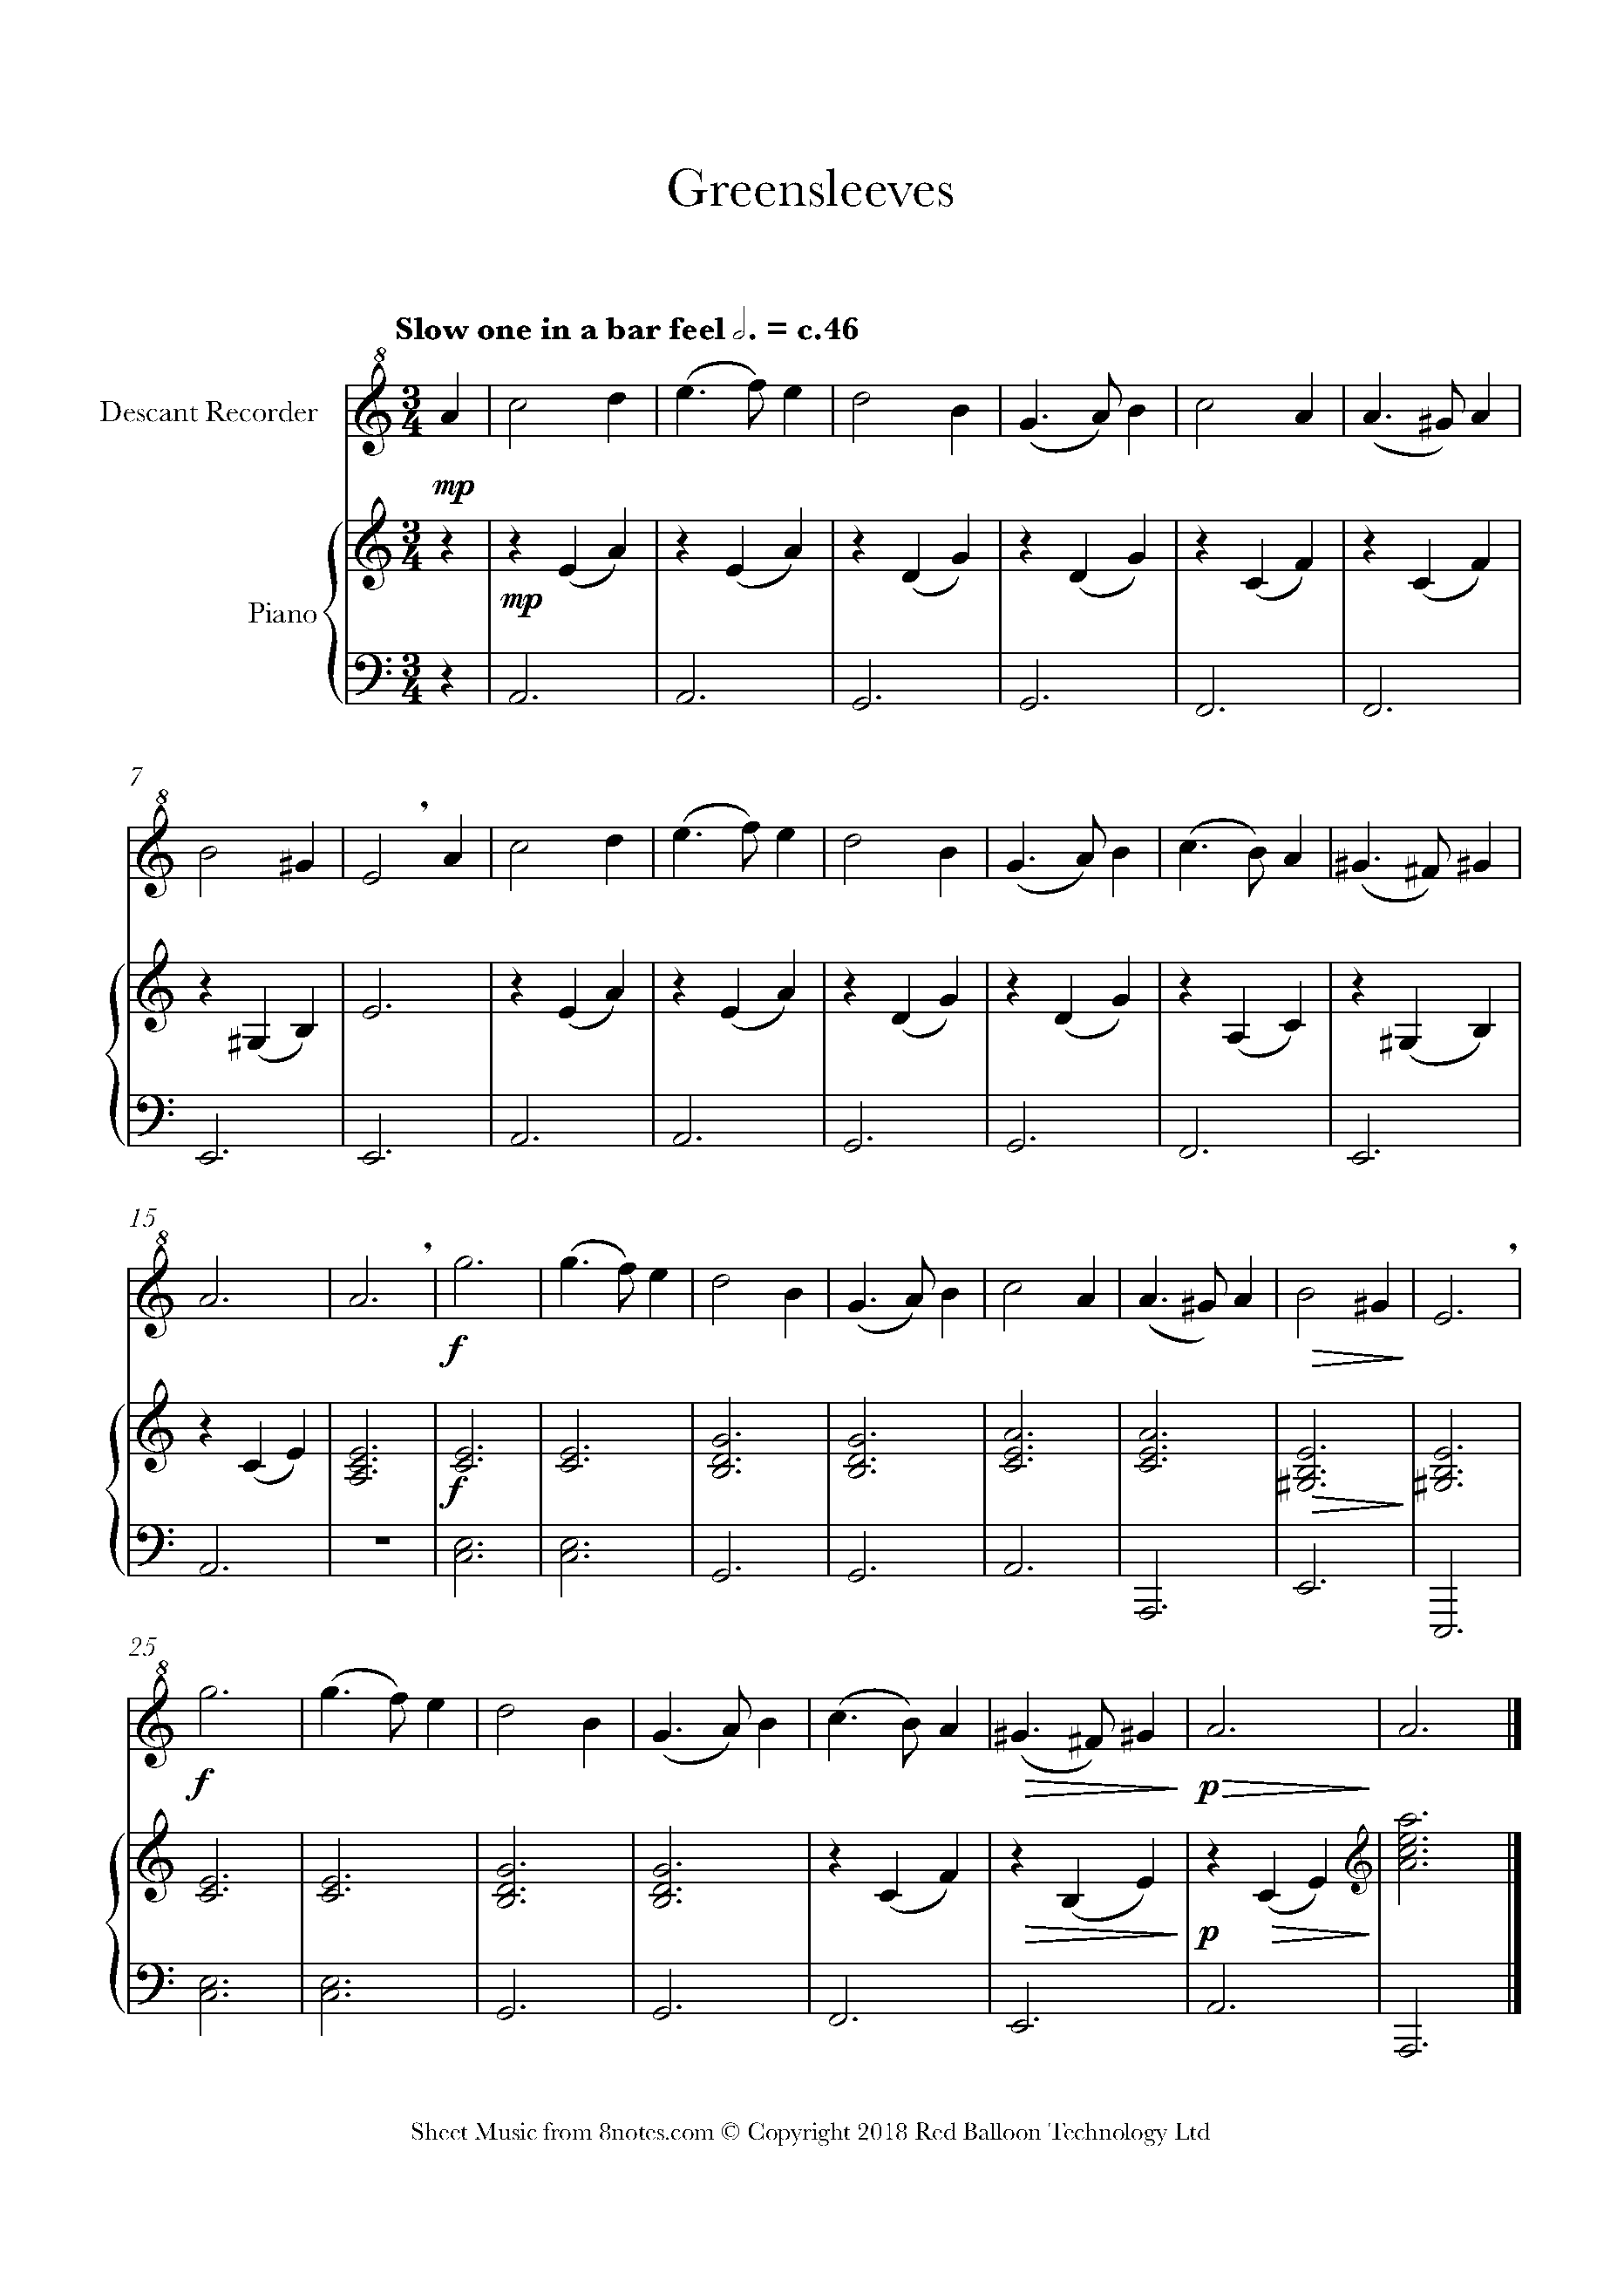 Greensleeves Sheet Music With Letters - Greensleeves Sheet music for String Quartet - 8notes.com : All instrumentations piano solo (96) concert band (43) guitar (42) guitar notes and tablatures (37) piano, vocal and guitar (33) brass ensemble (32) string orchestra (28) organ (28) choral satb (26) flute (17) string quartet.